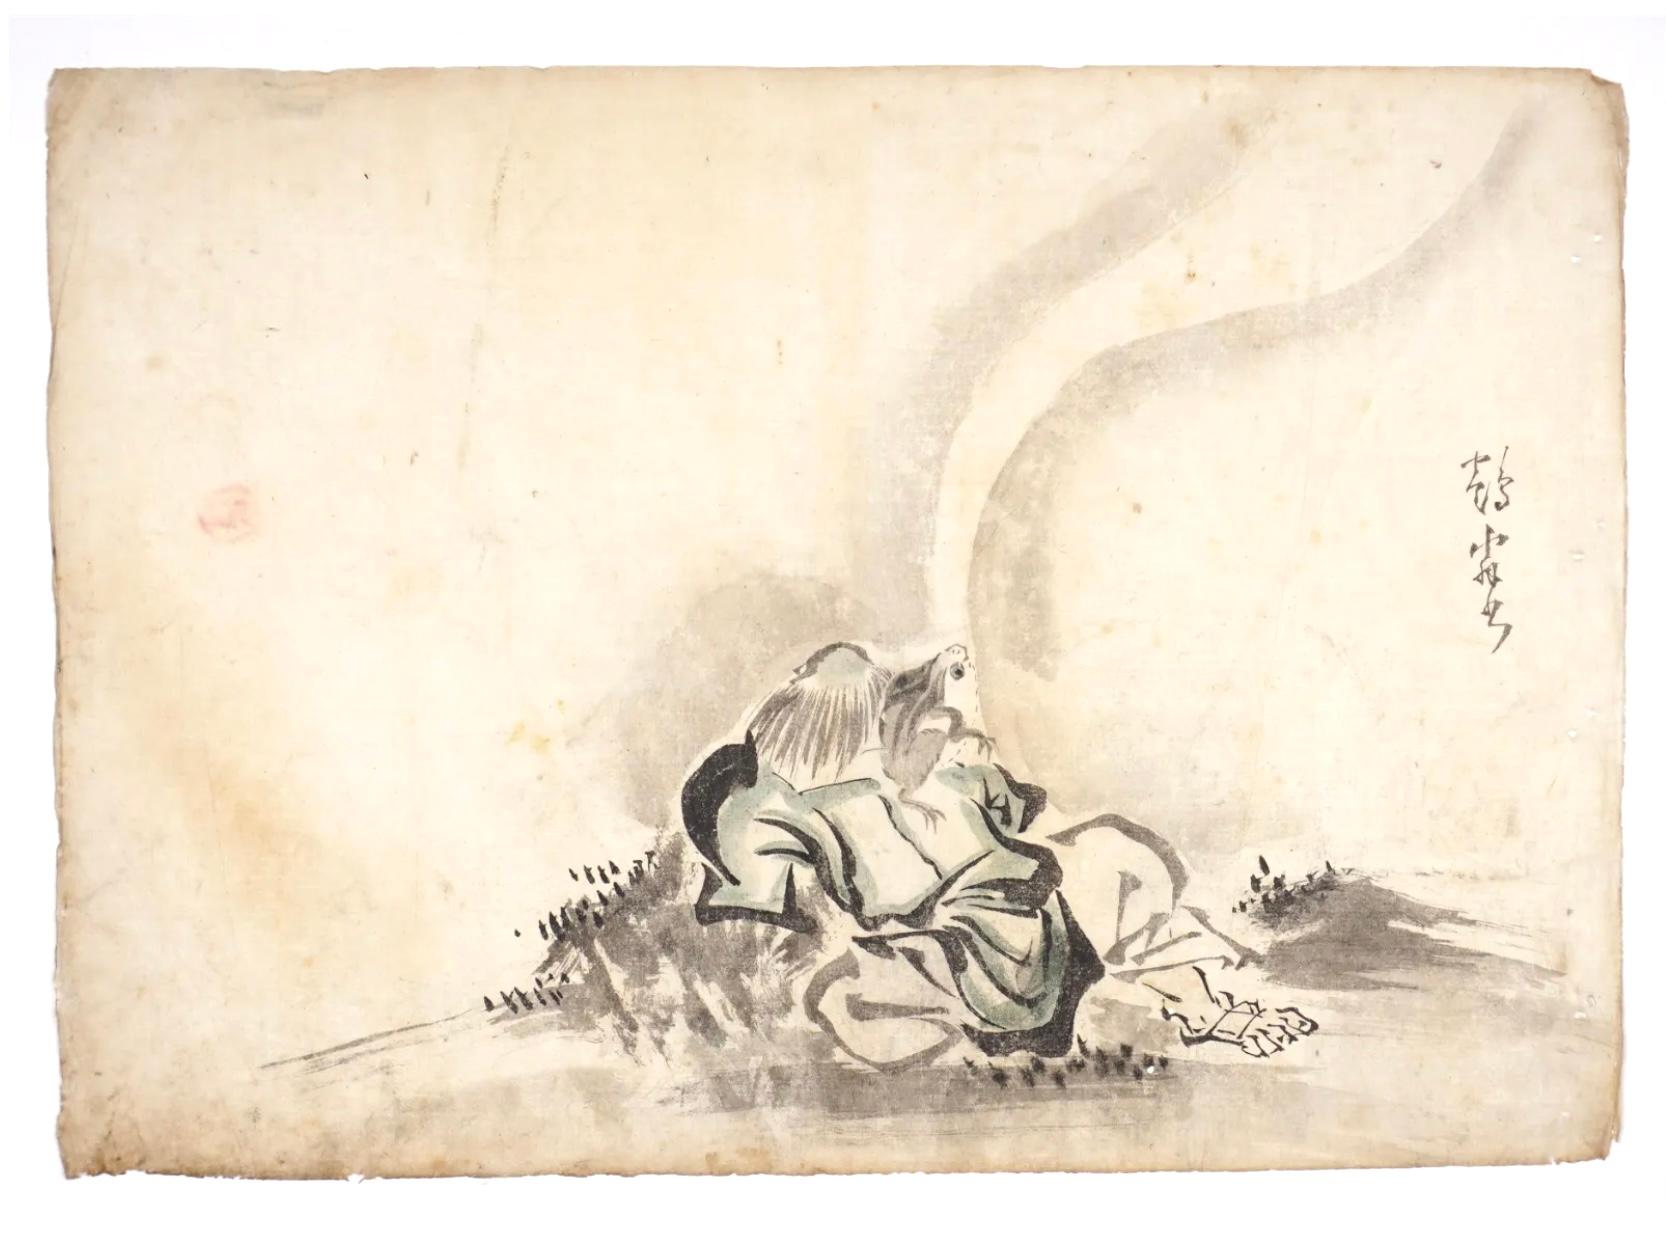 Manner of ITCHO, Hanabusa, (Japanese, 1652-1724): Three watercolor and ink drawings on paper, to include:
1) Man seated with monkey , signed right side, 16.25